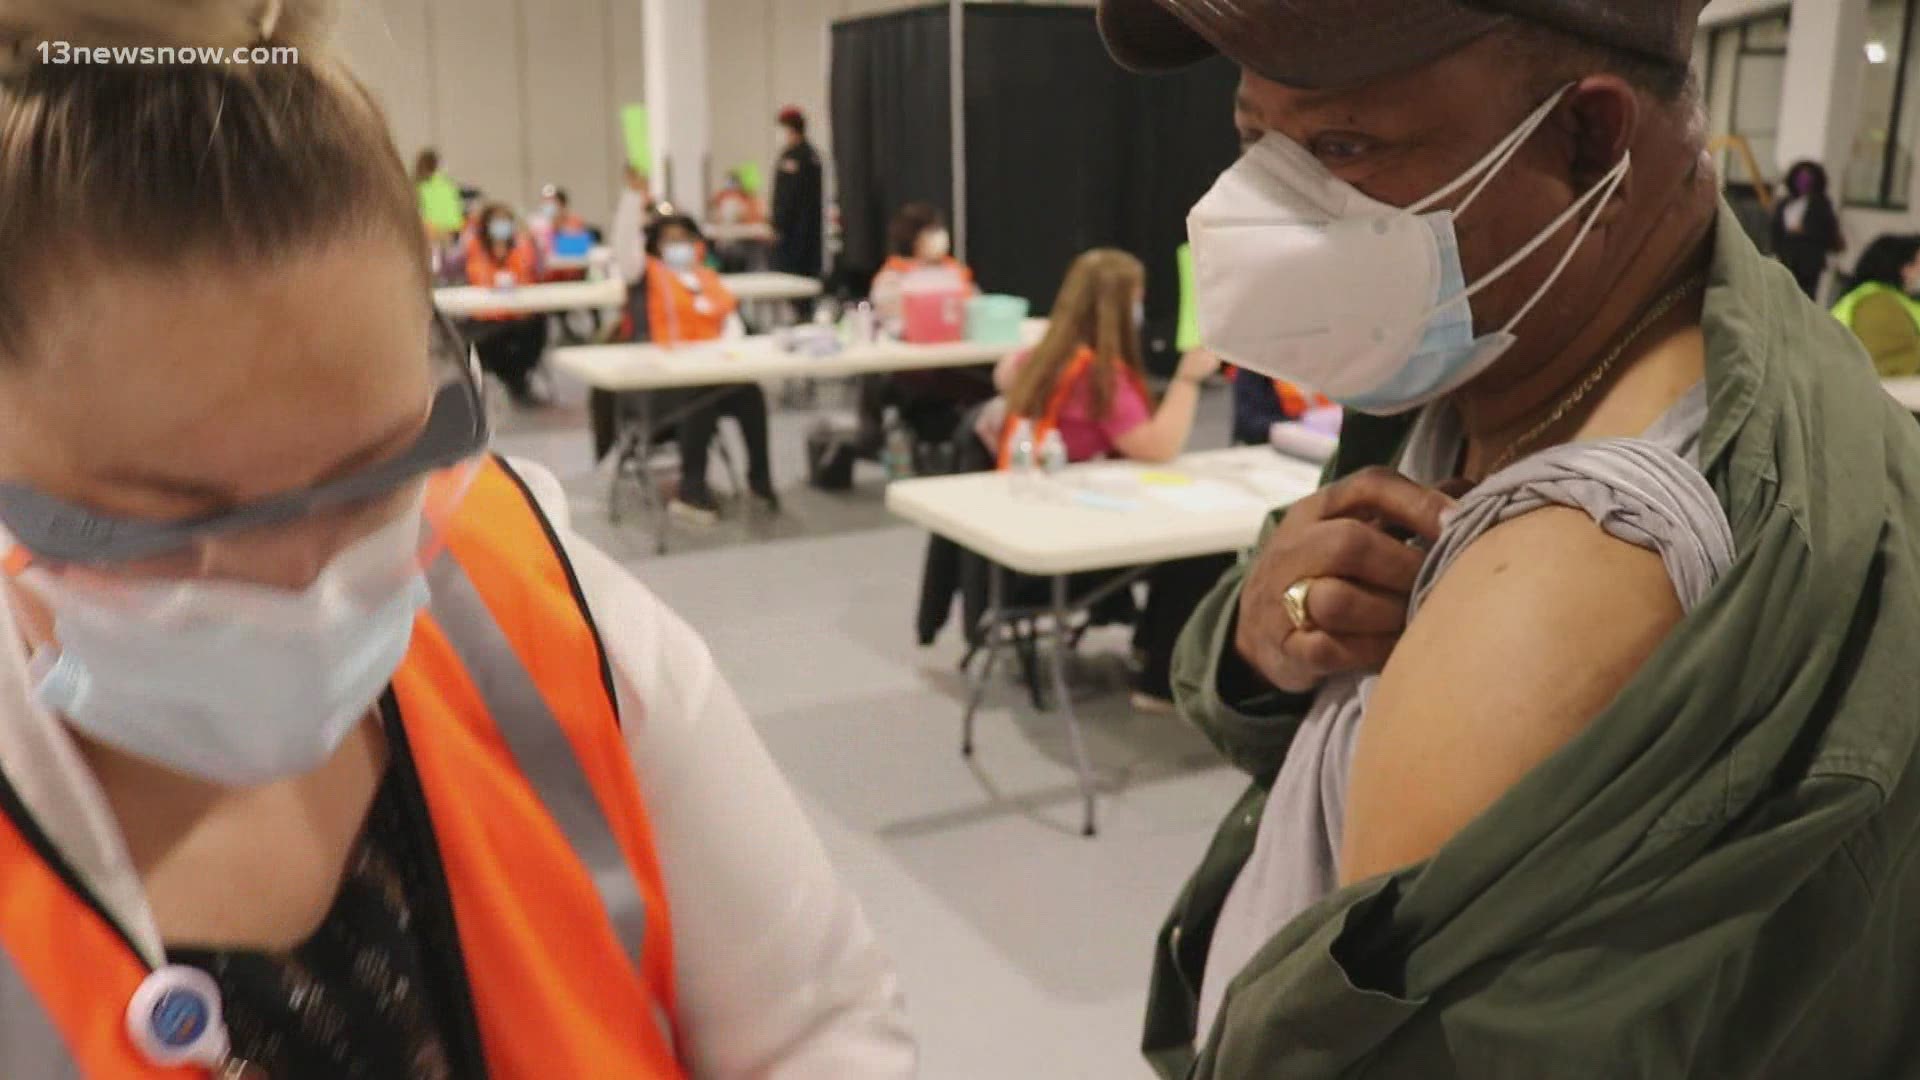 Health officials said 10,000 Phase 1b individuals will receive COVID-19 vaccinations at the Scope and the Hampton Convention Center on Saturday, by appointment only.